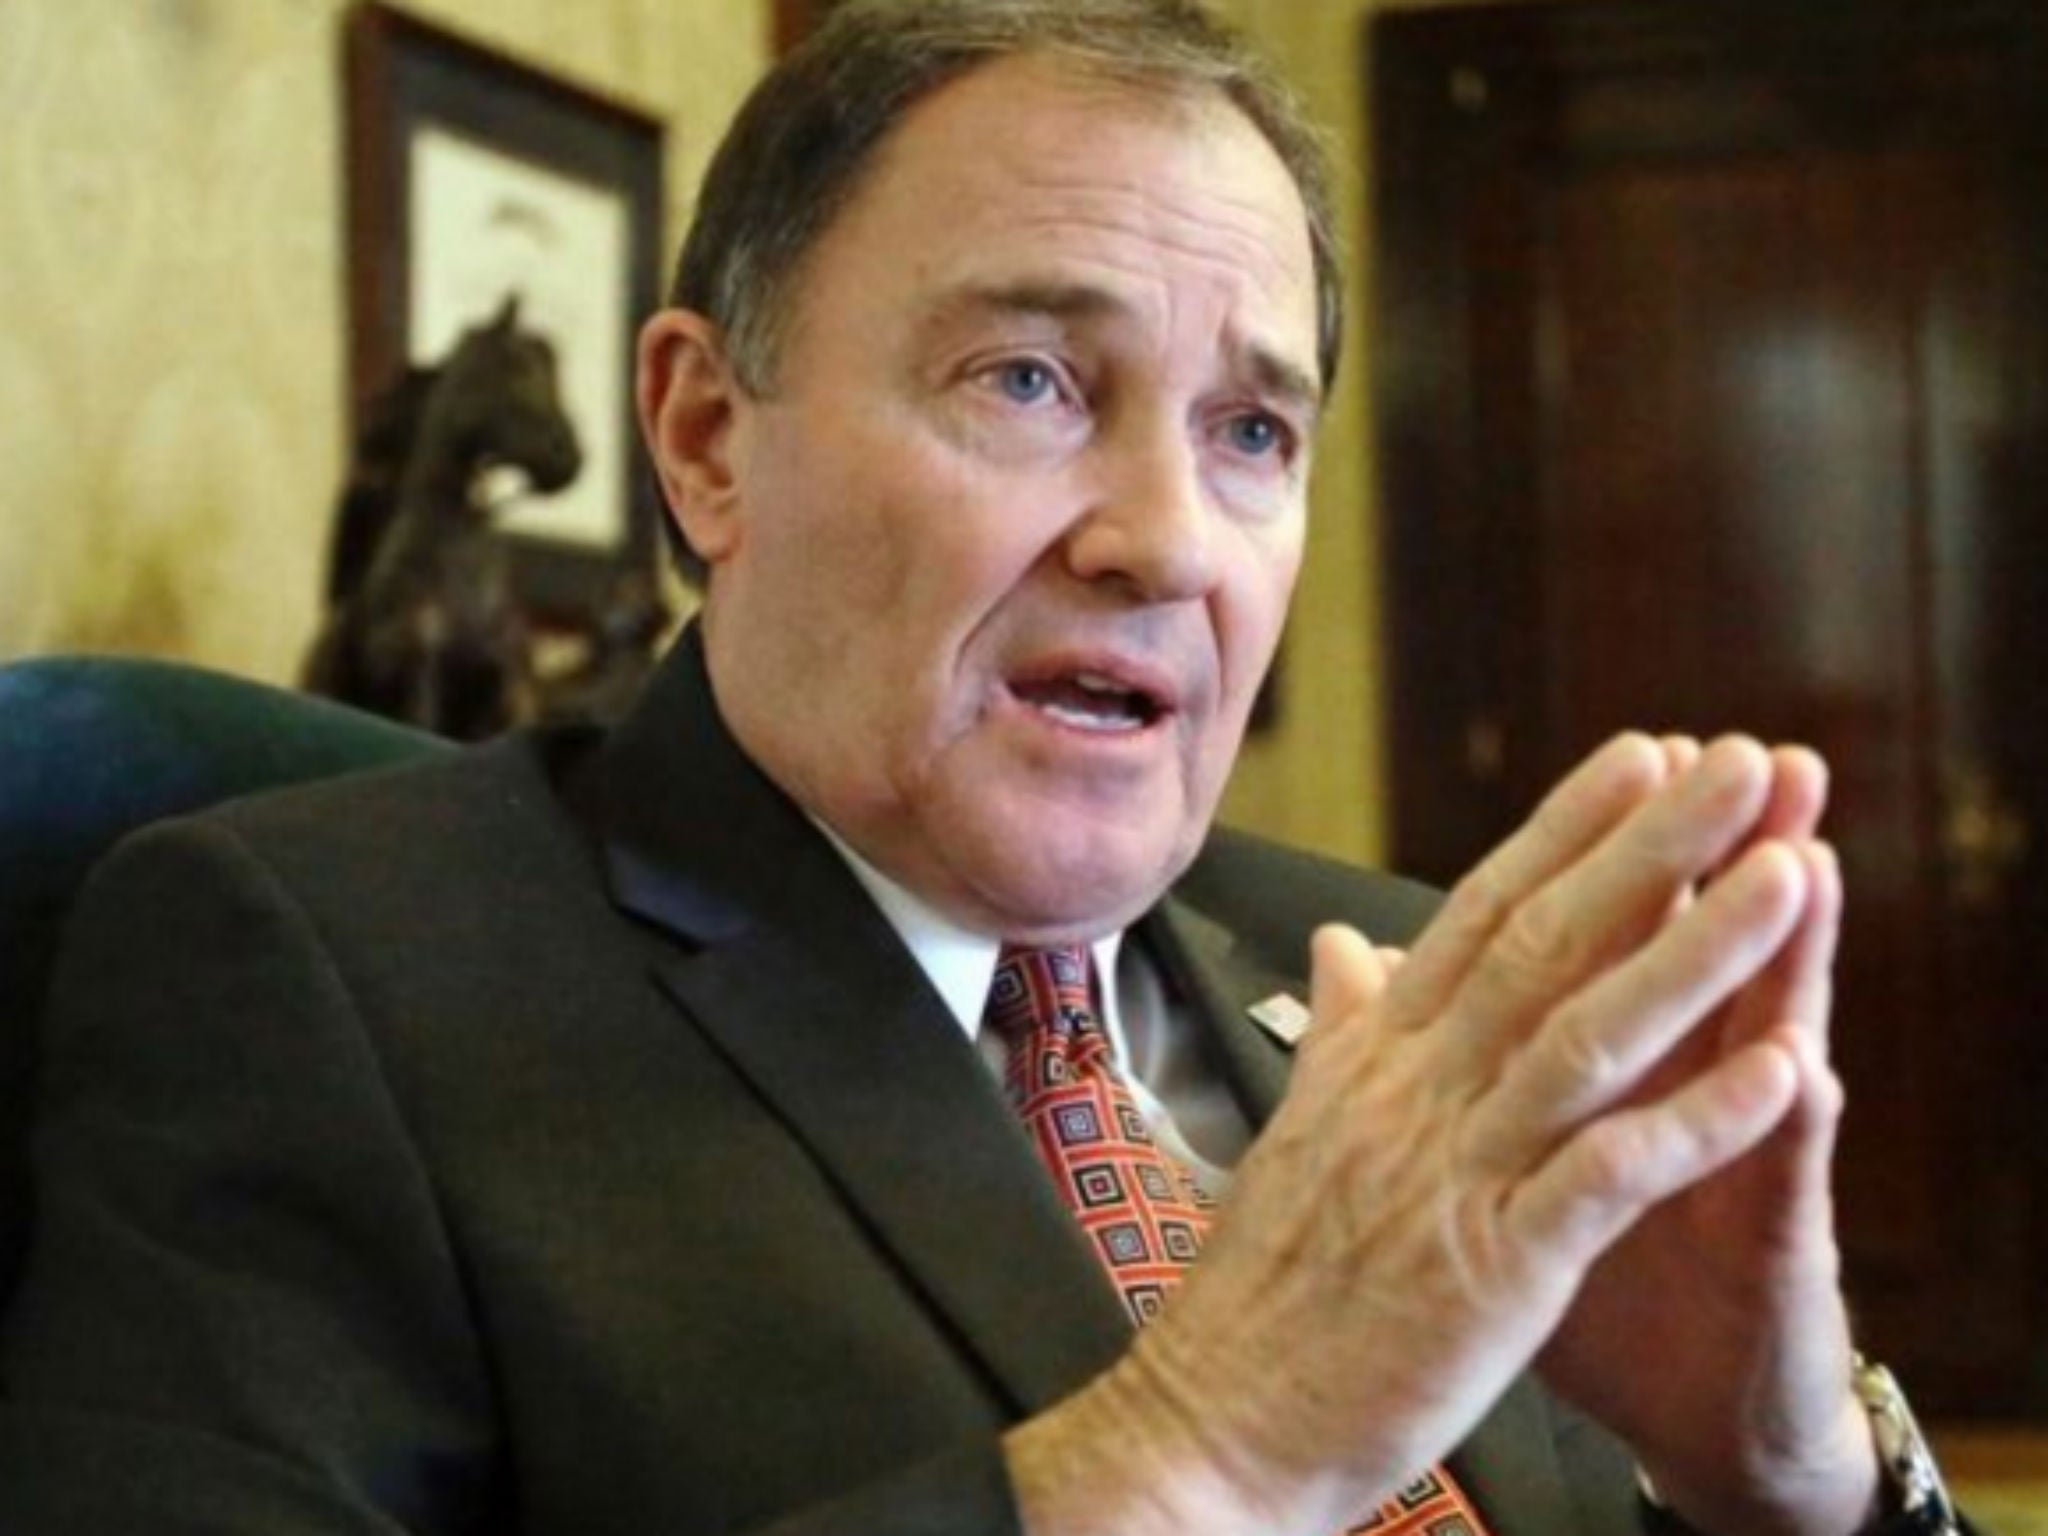 Governor Gary Herbert signed the new bill to further restrict abortions